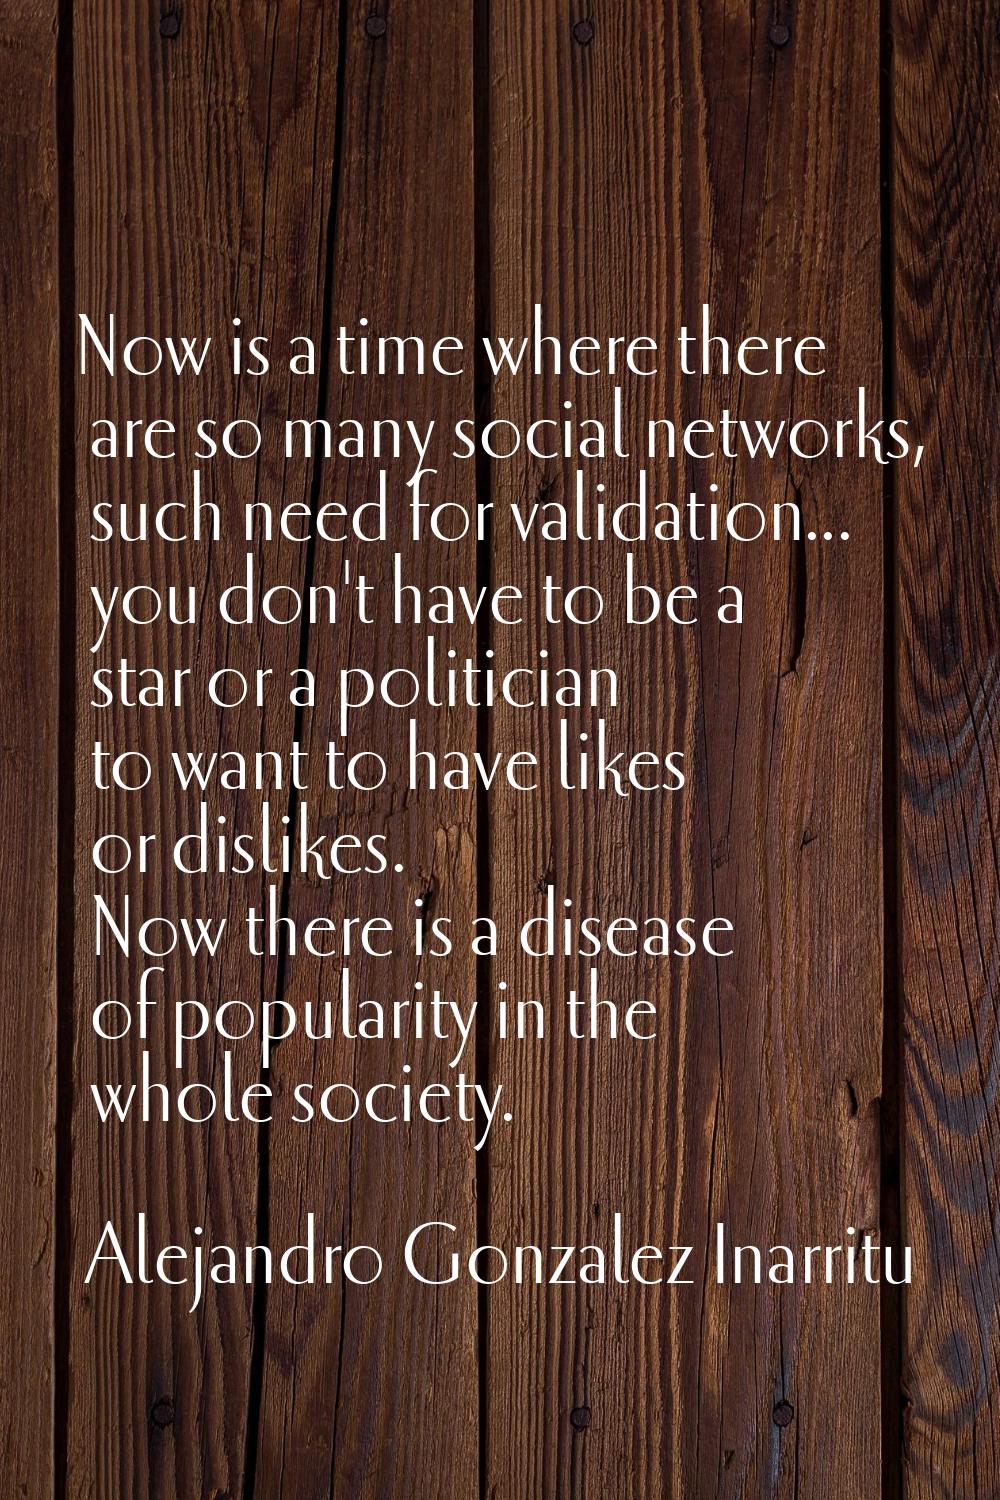 Now is a time where there are so many social networks, such need for validation... you don't have t